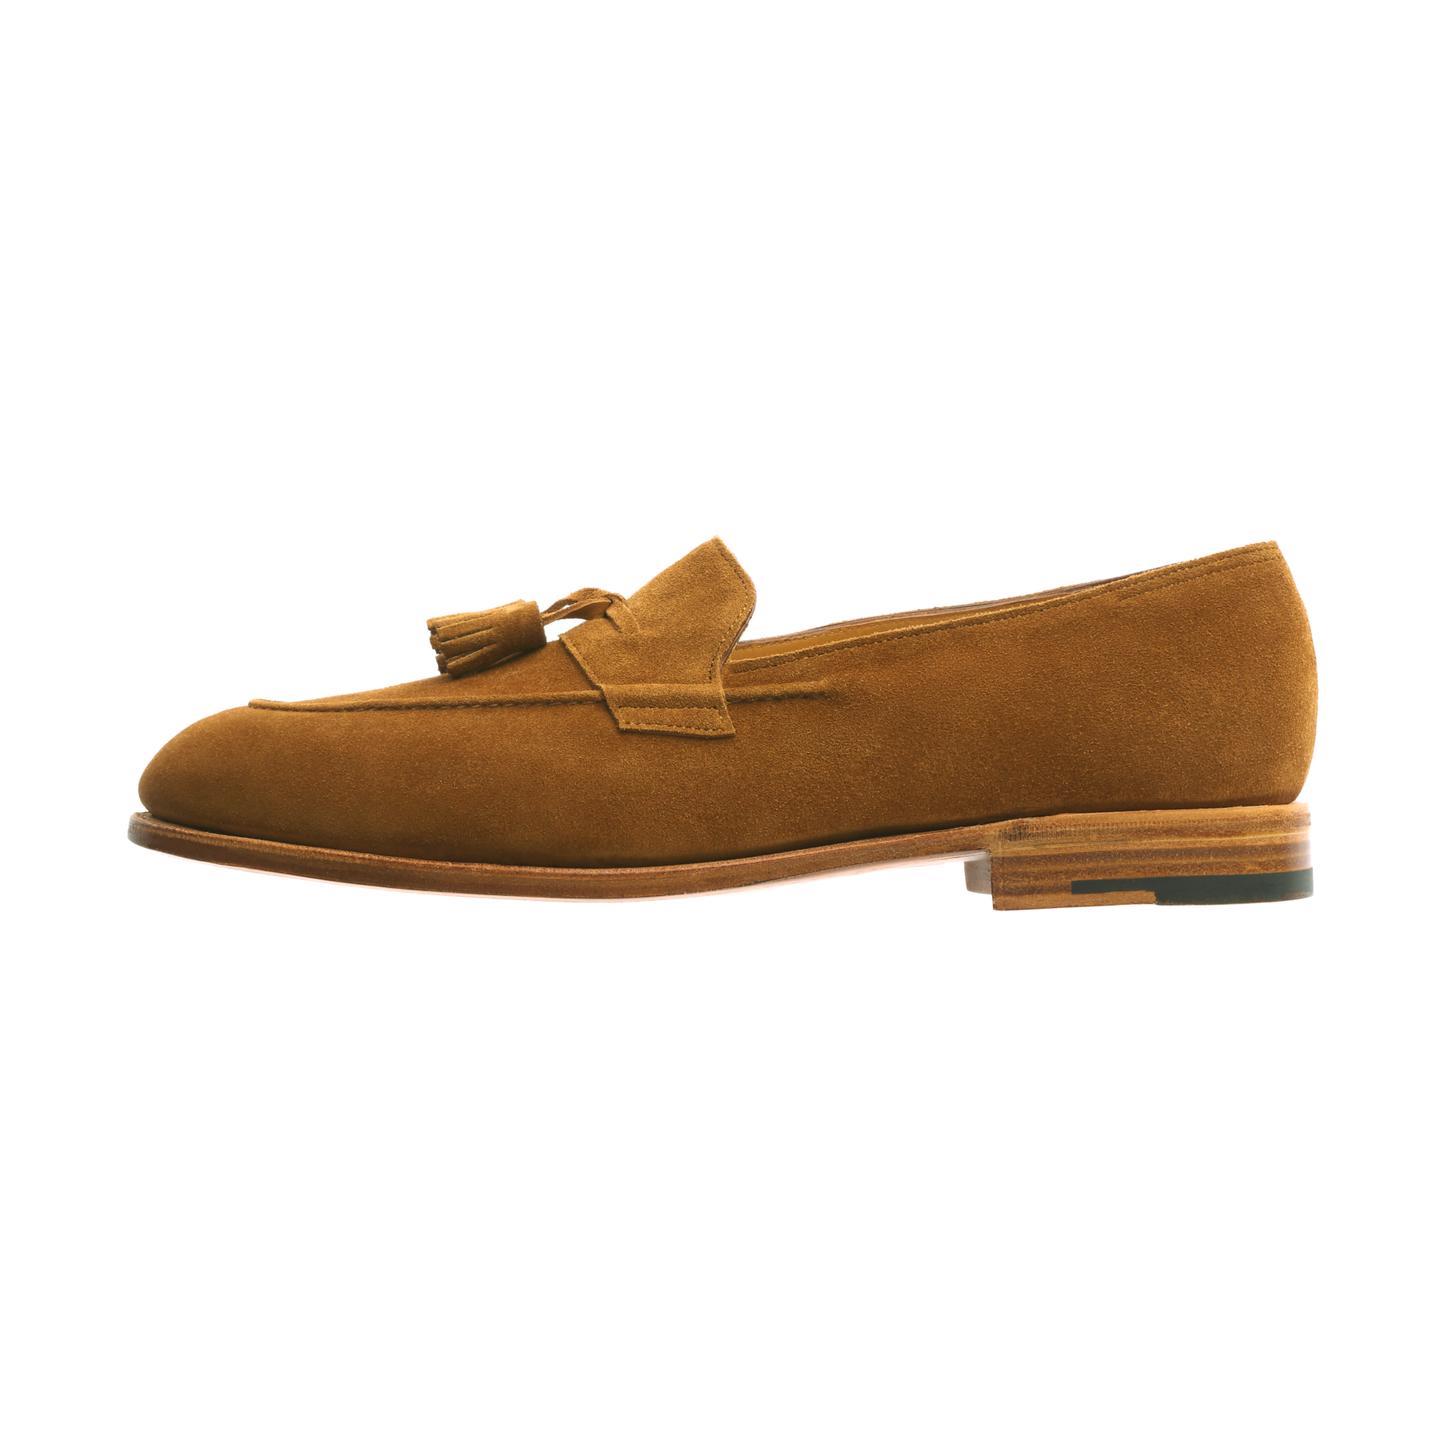 John Lobb "Callington" Suede Loafer with Hand-Stitching Apron in Tobacco Brown - SARTALE